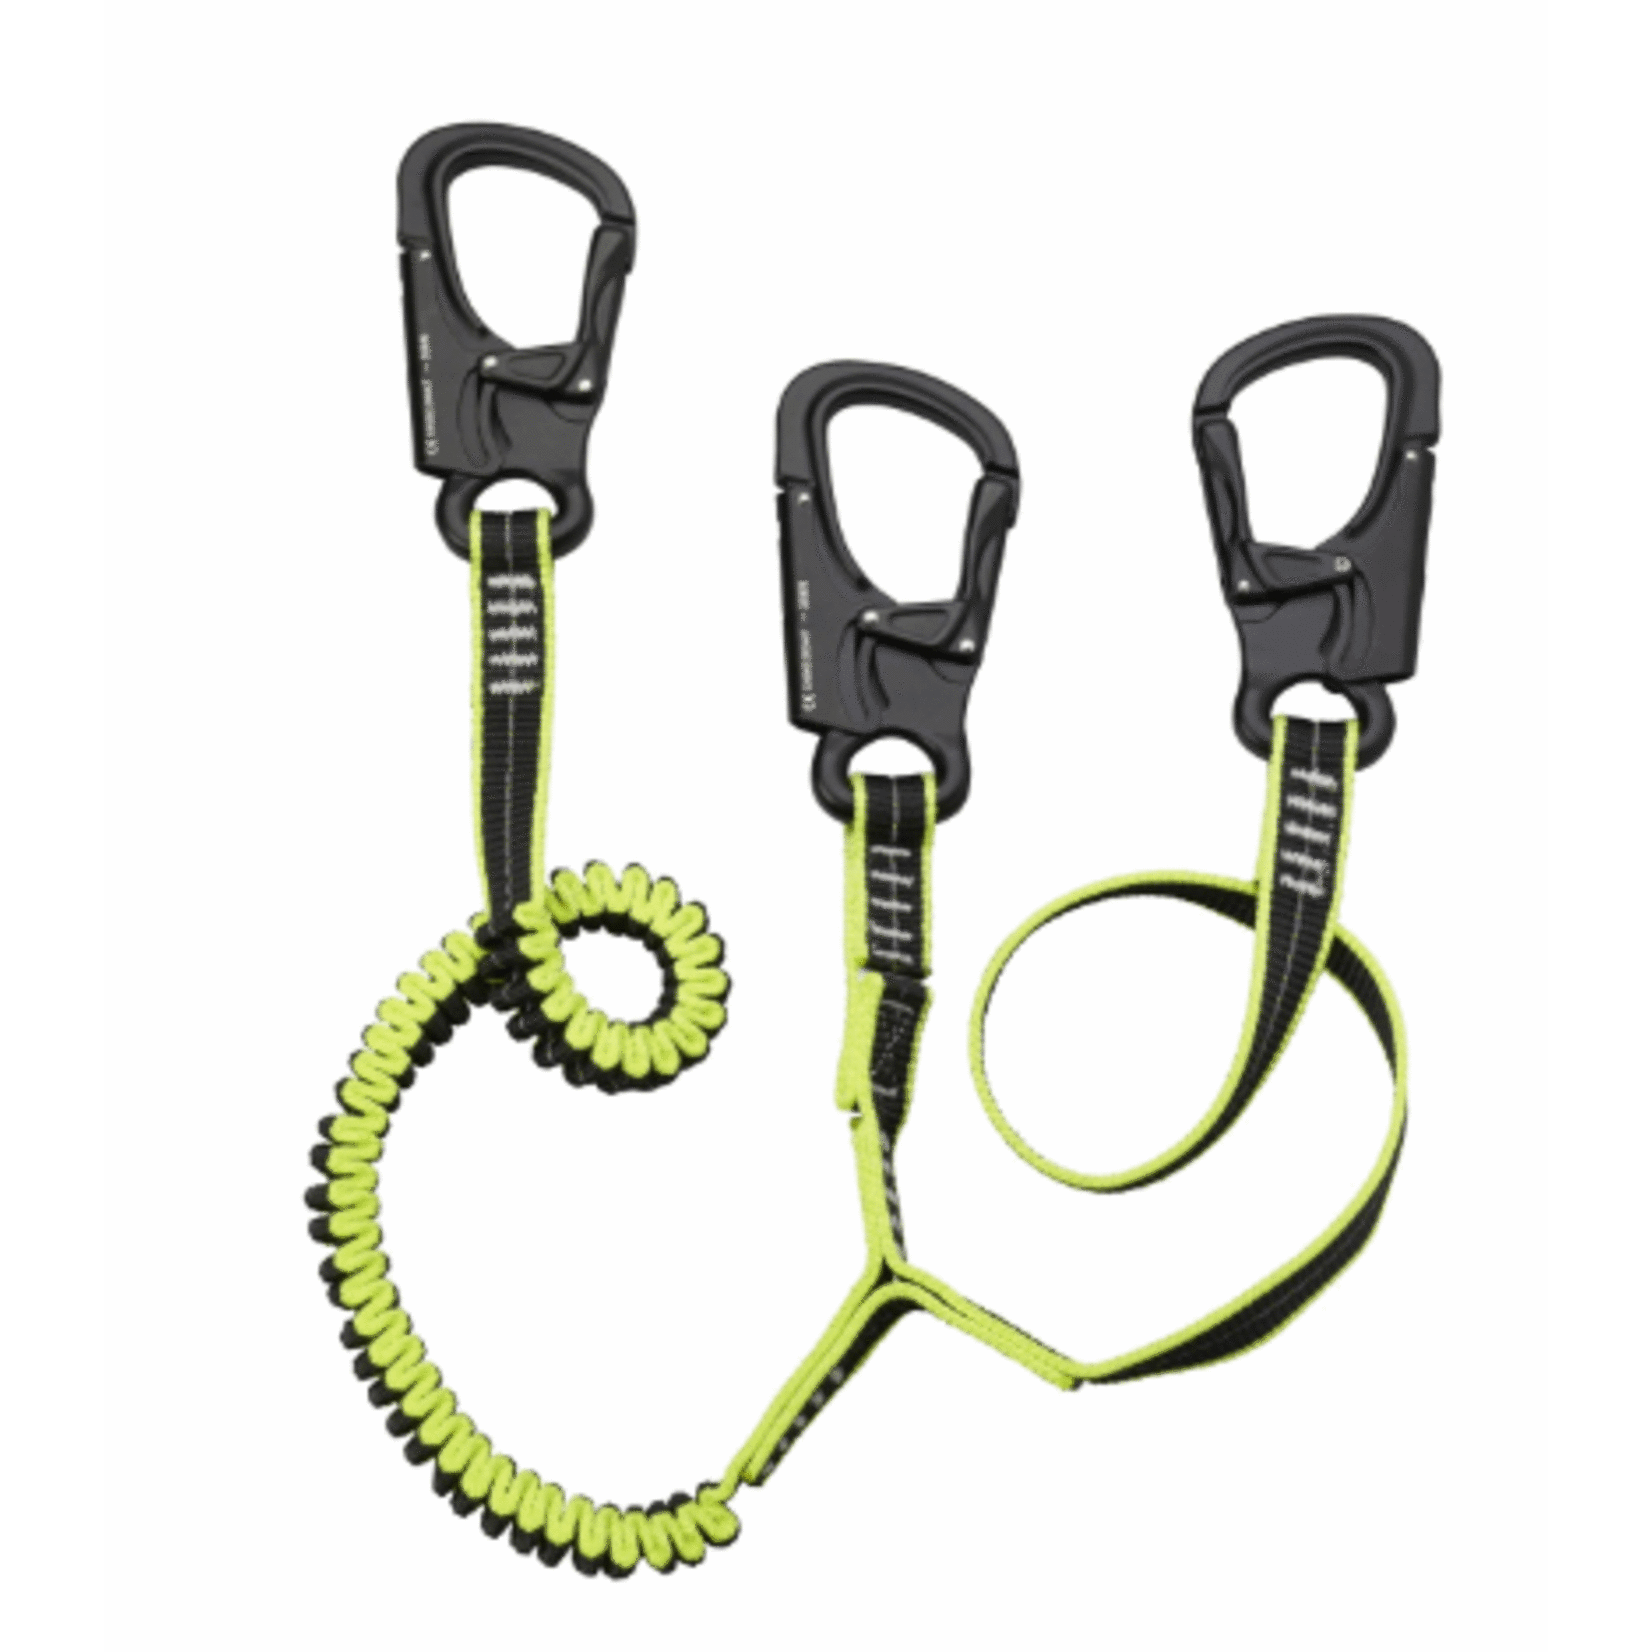 Plastimo Double tether 3 technical safety hooks